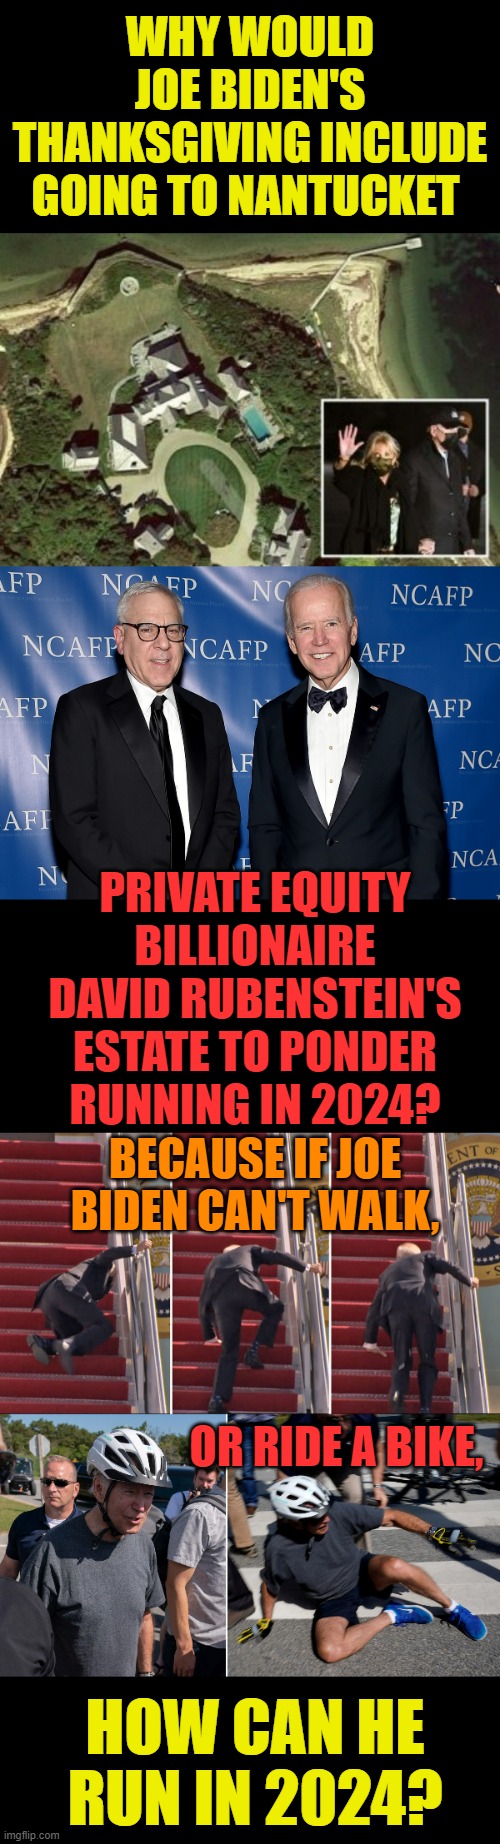 A Couple Of Questions... | WHY WOULD JOE BIDEN'S THANKSGIVING INCLUDE GOING TO NANTUCKET; PRIVATE EQUITY BILLIONAIRE DAVID RUBENSTEIN'S ESTATE TO PONDER RUNNING IN 2024? BECAUSE IF JOE BIDEN CAN'T WALK, OR RIDE A BIKE, HOW CAN HE RUN IN 2024? | image tagged in memes,politics,joe biden,pondering,running,again | made w/ Imgflip meme maker